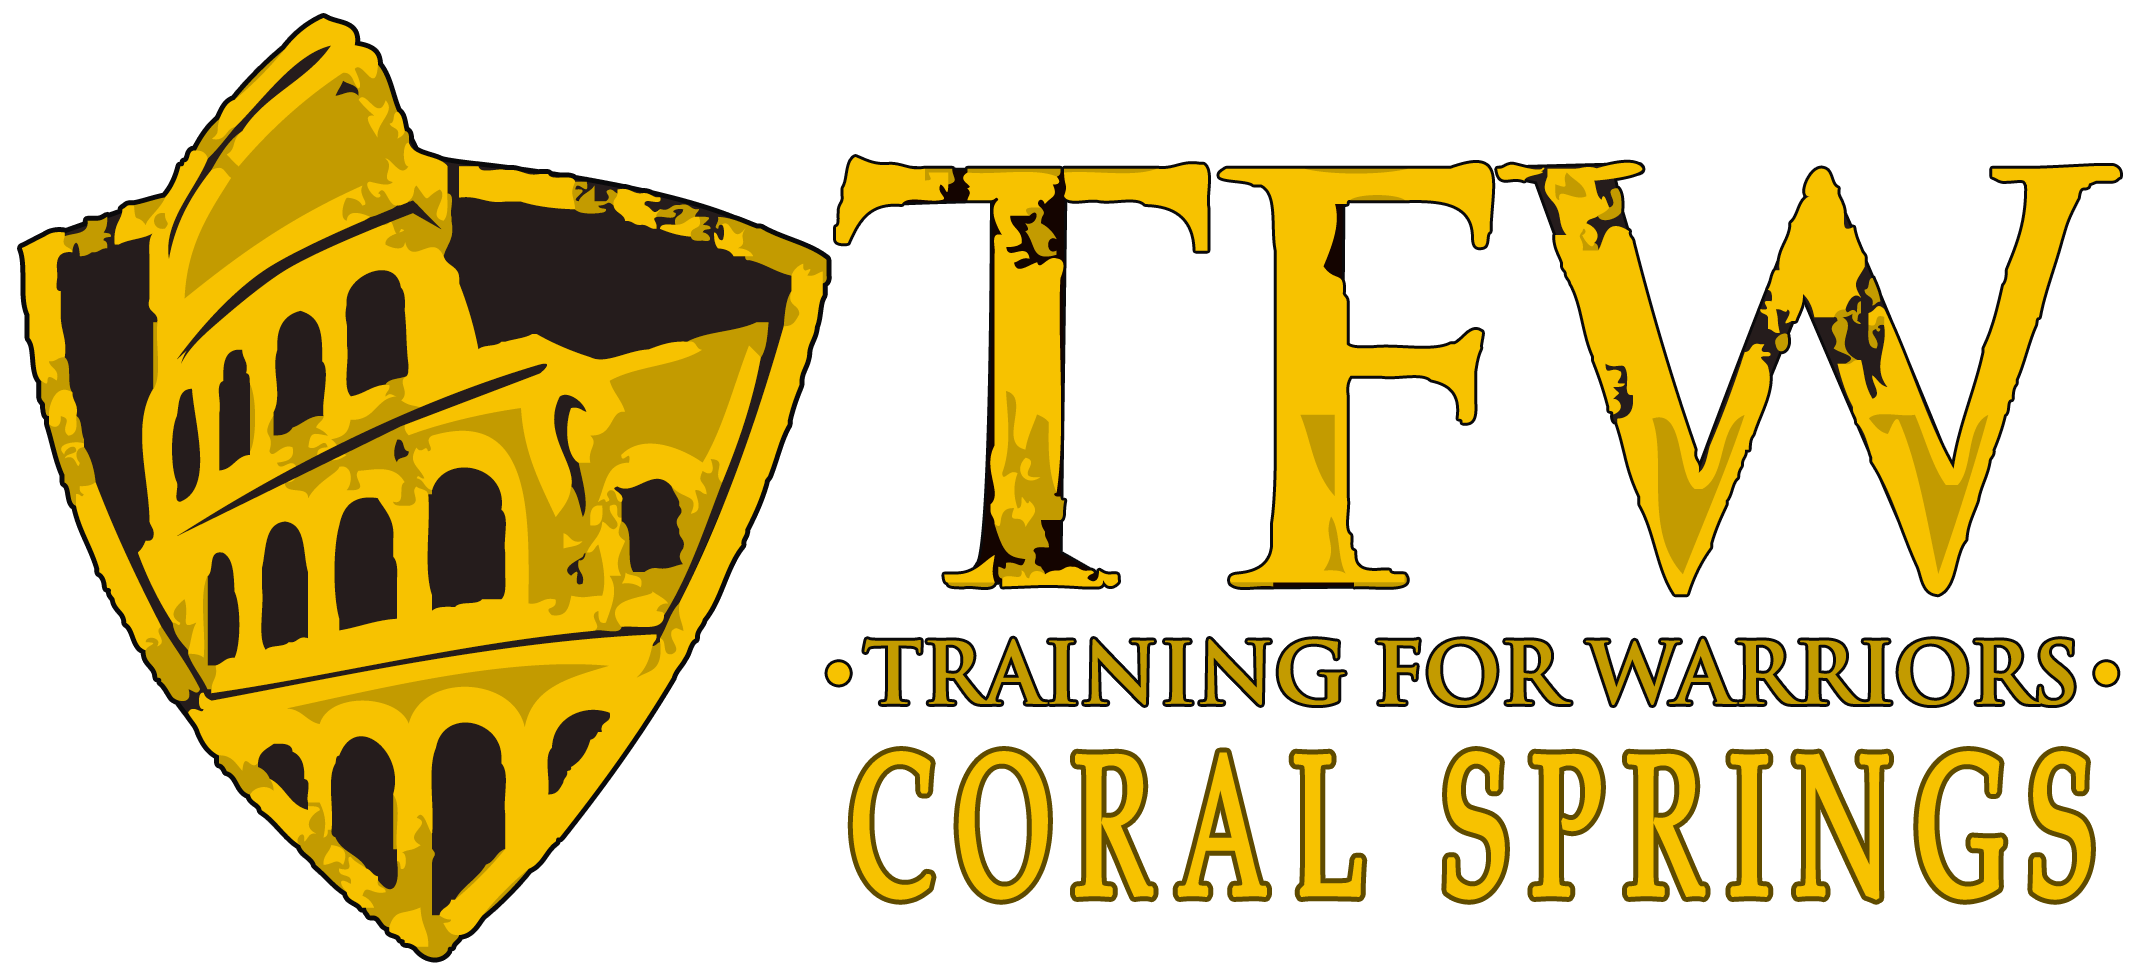 Training for Warriors Coral Springs logo